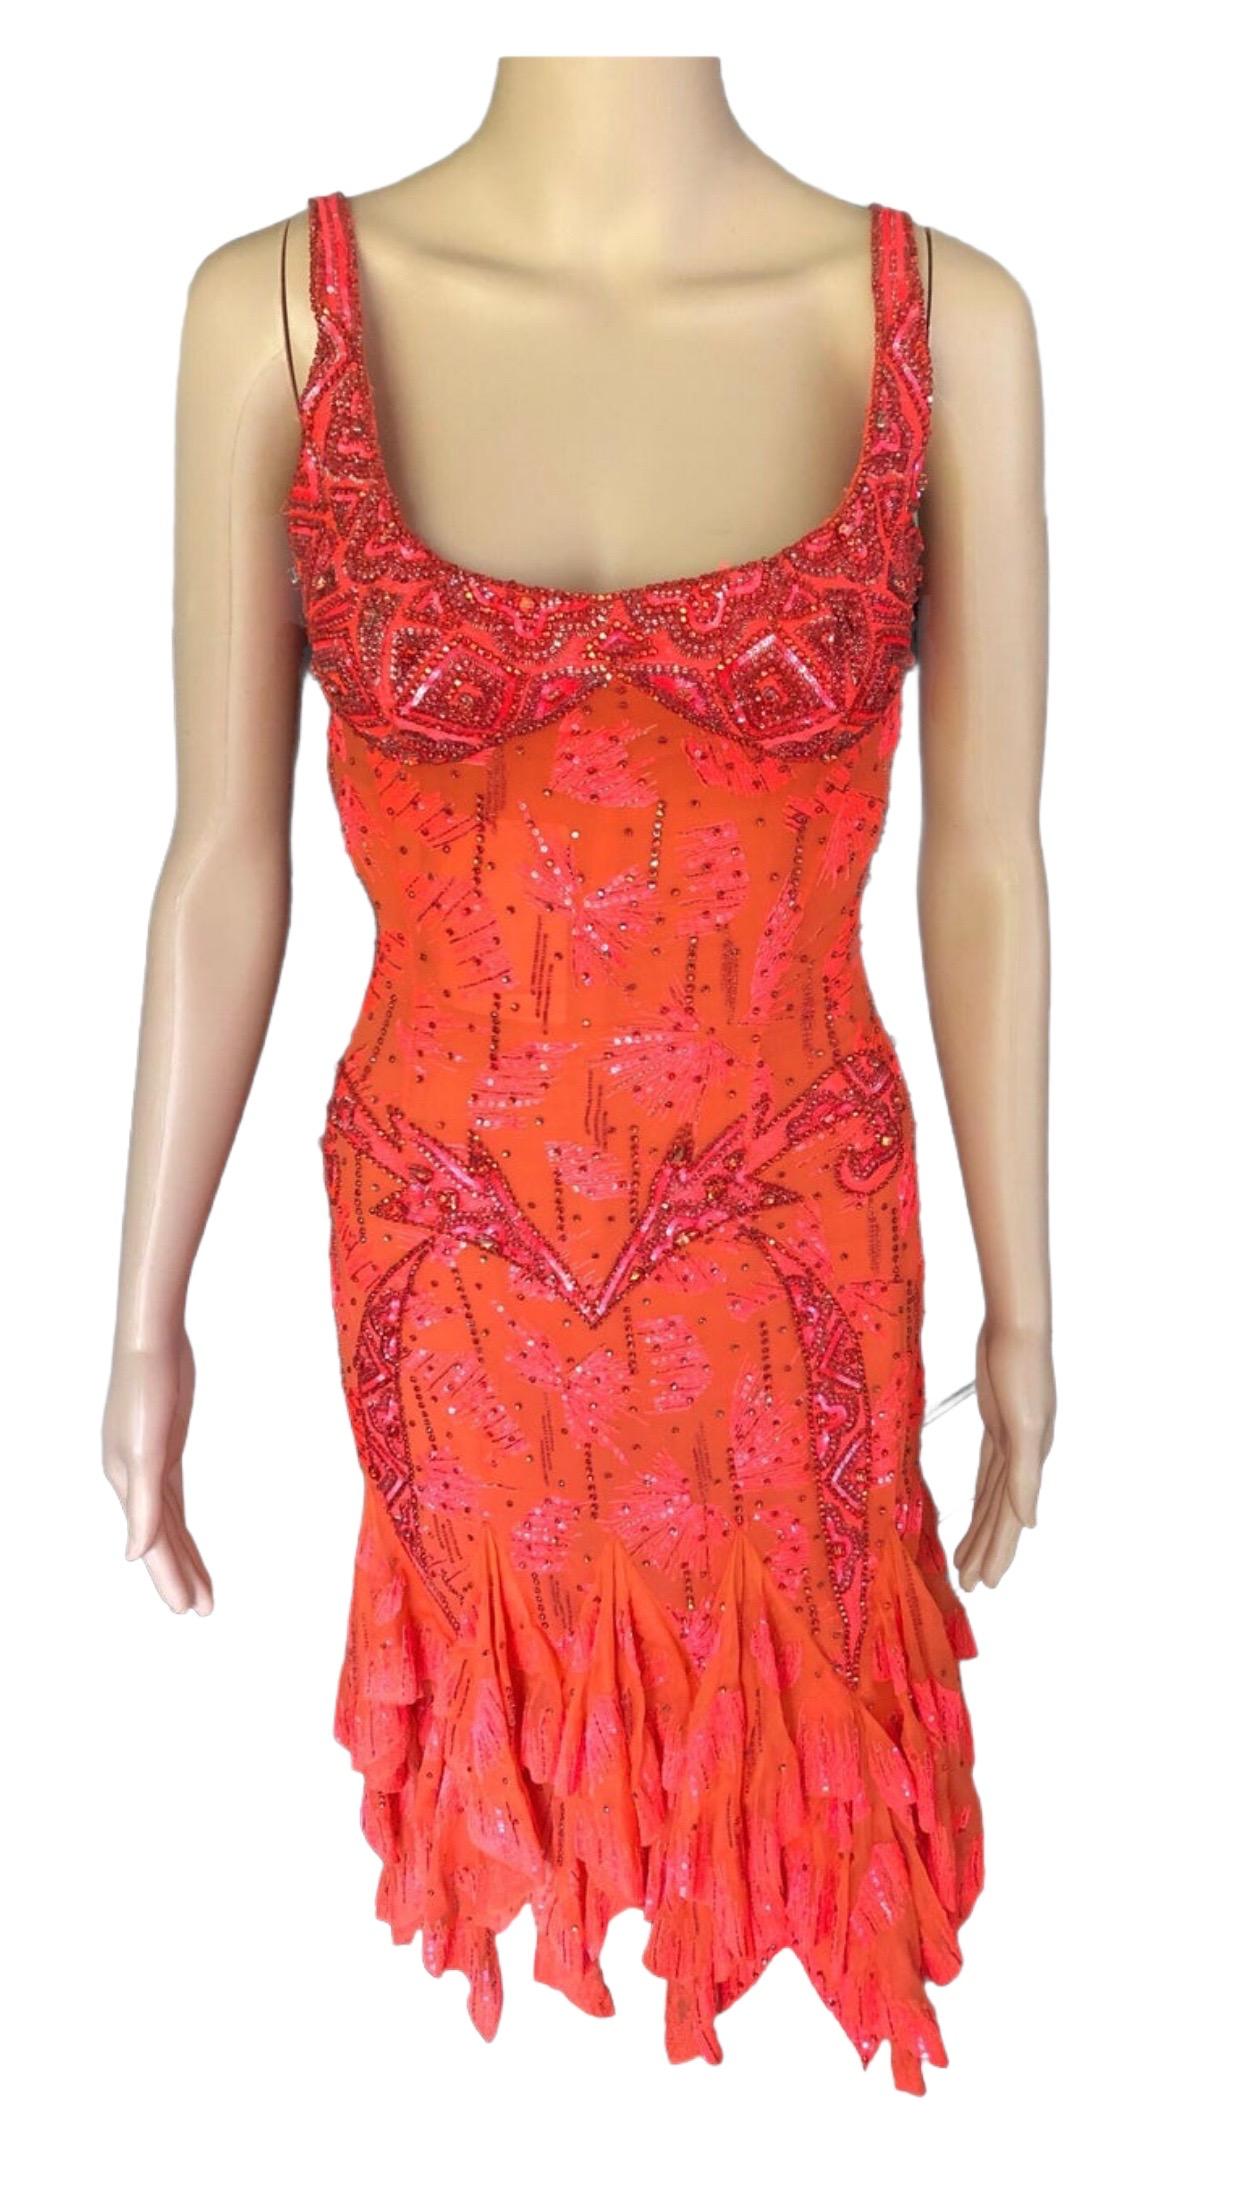 Atelier Versace by Gianni Versace S/S 2002 Haute Couture Embellished Dress For Sale 6